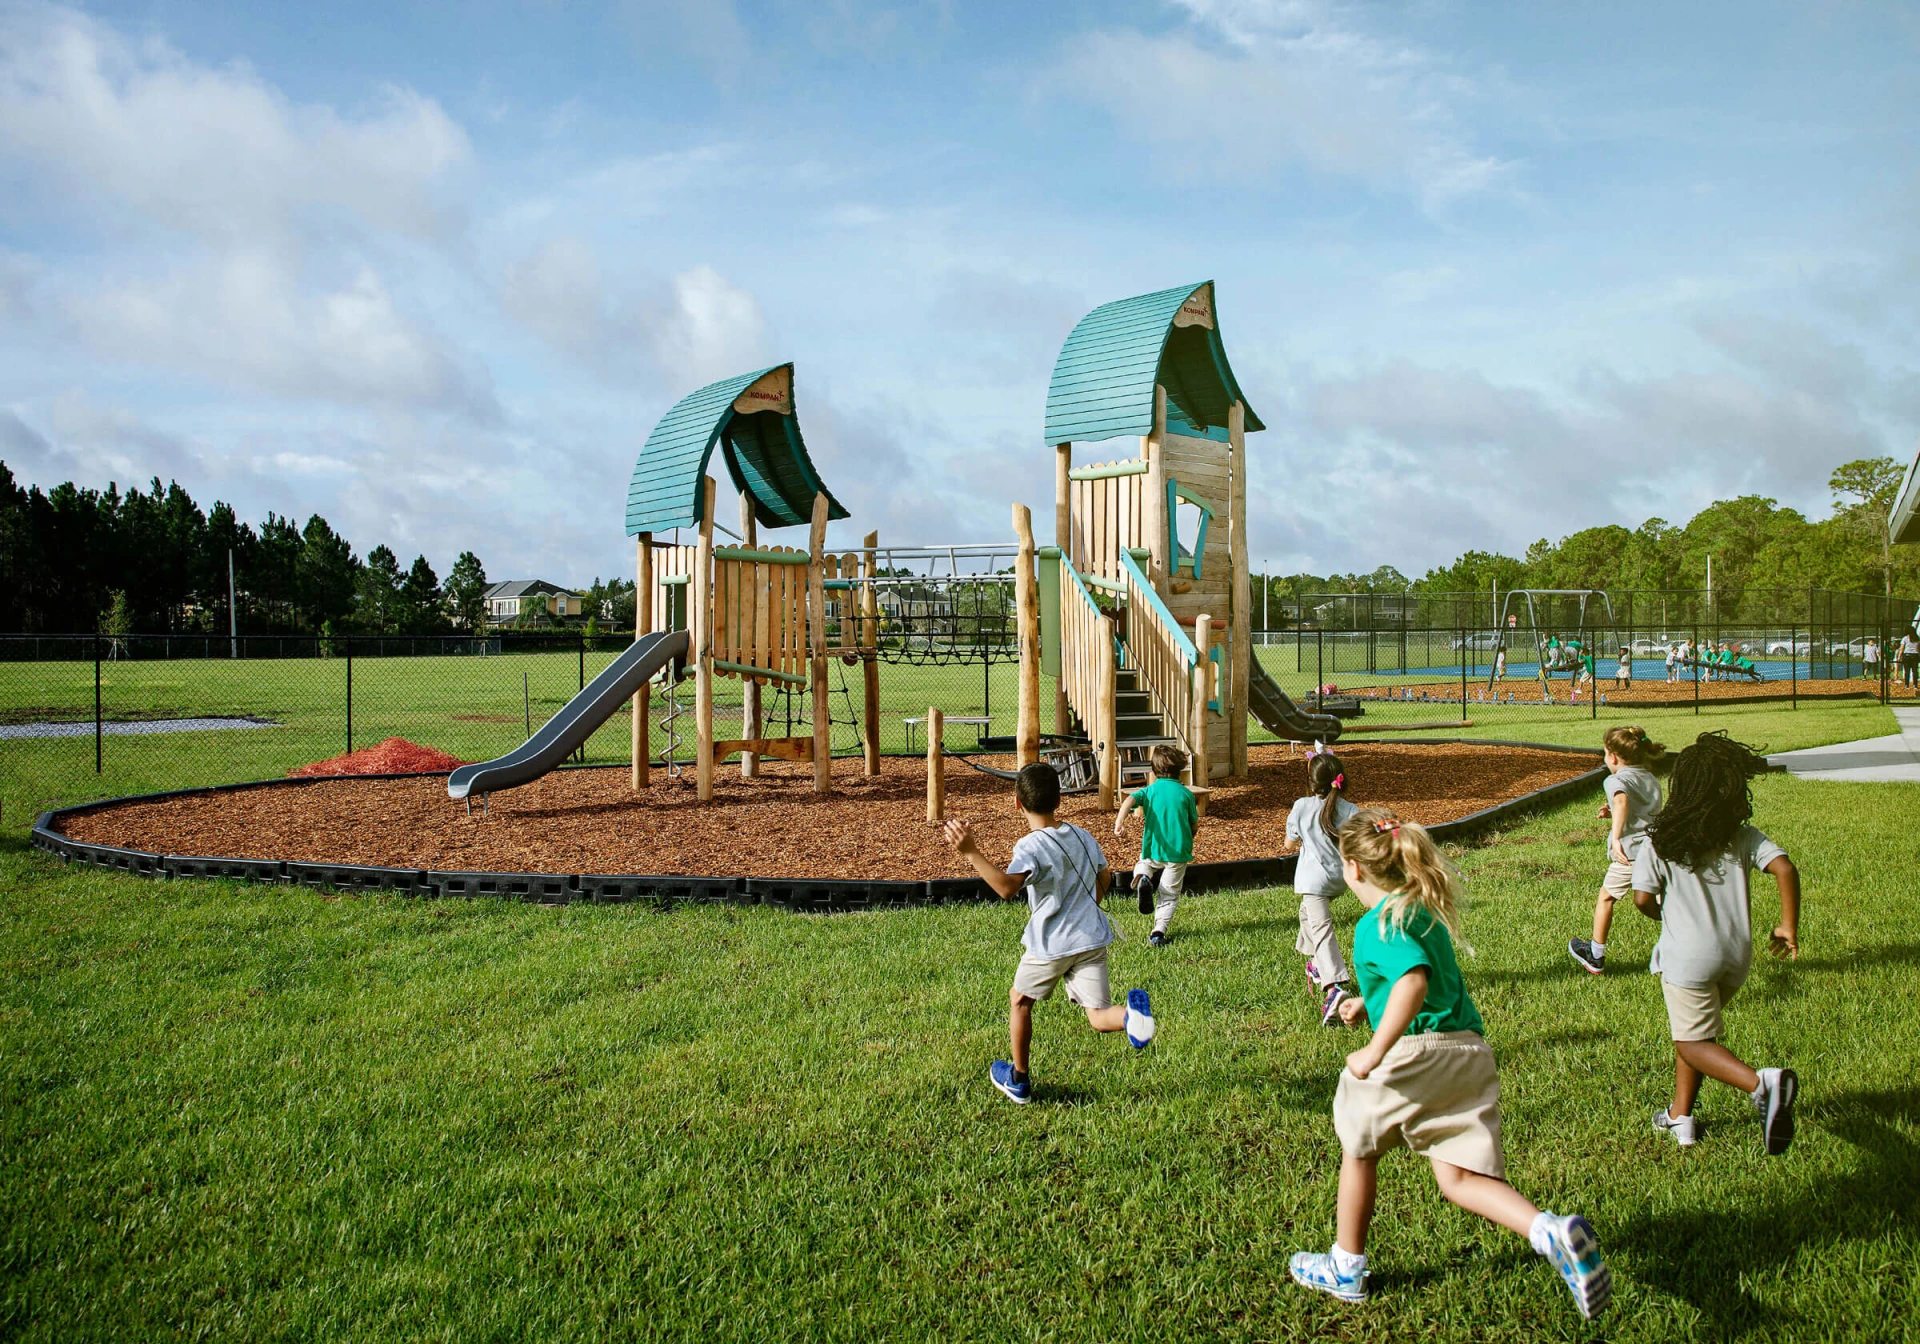 Pupils running out on a playground during recess